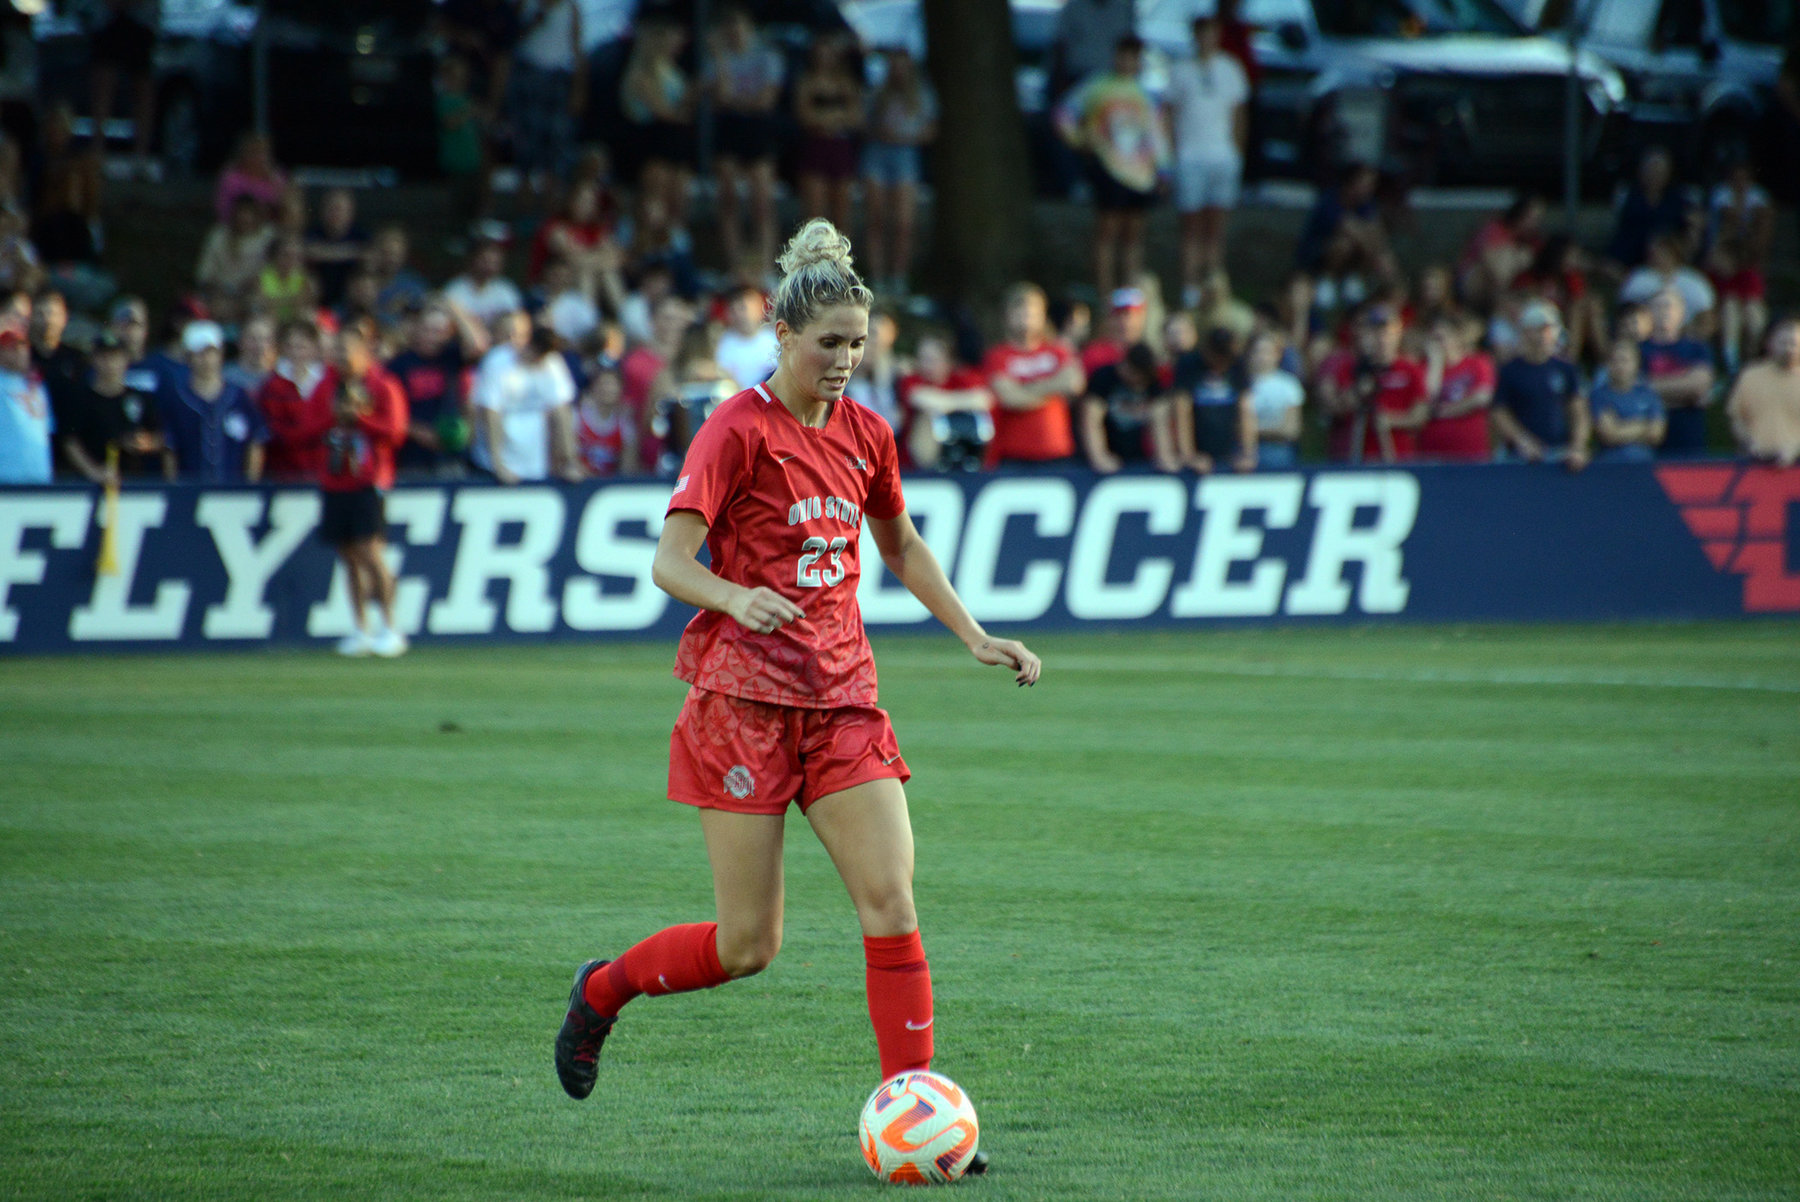 Ohio State Soccer Shuts Out Dayton, 4-0